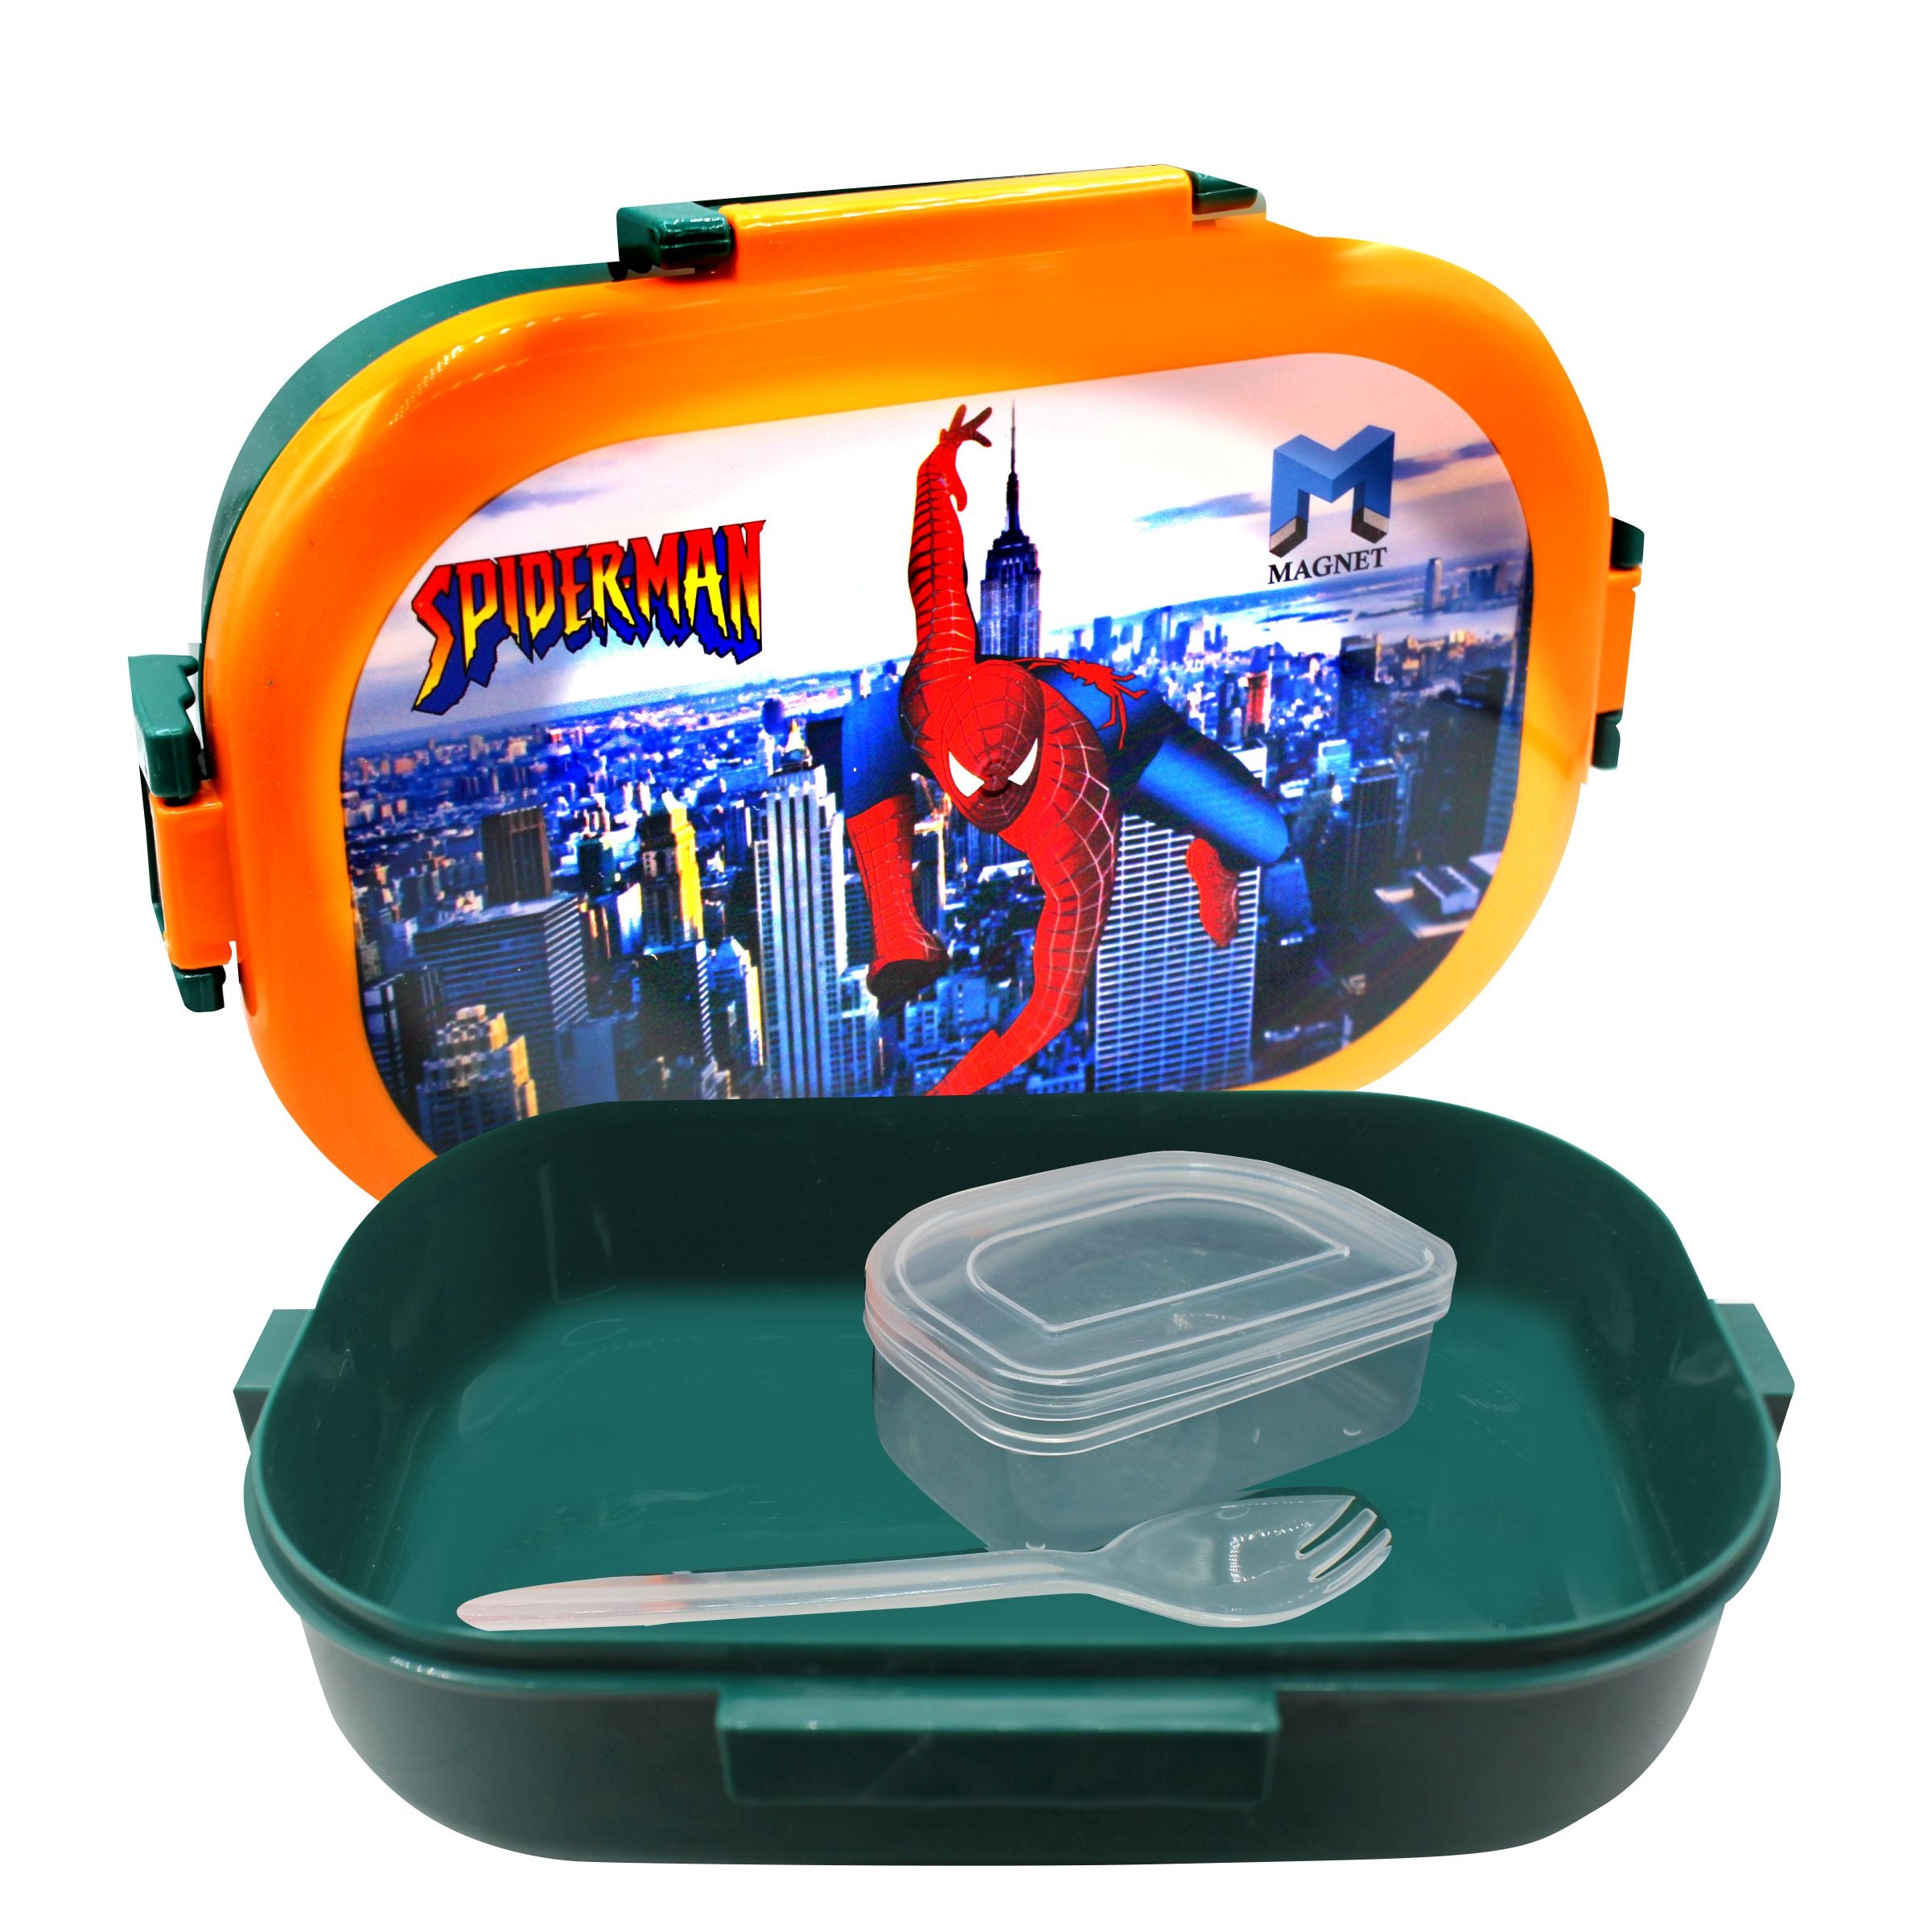 Spiderman Character Premium Quality Lunch Box For Kids